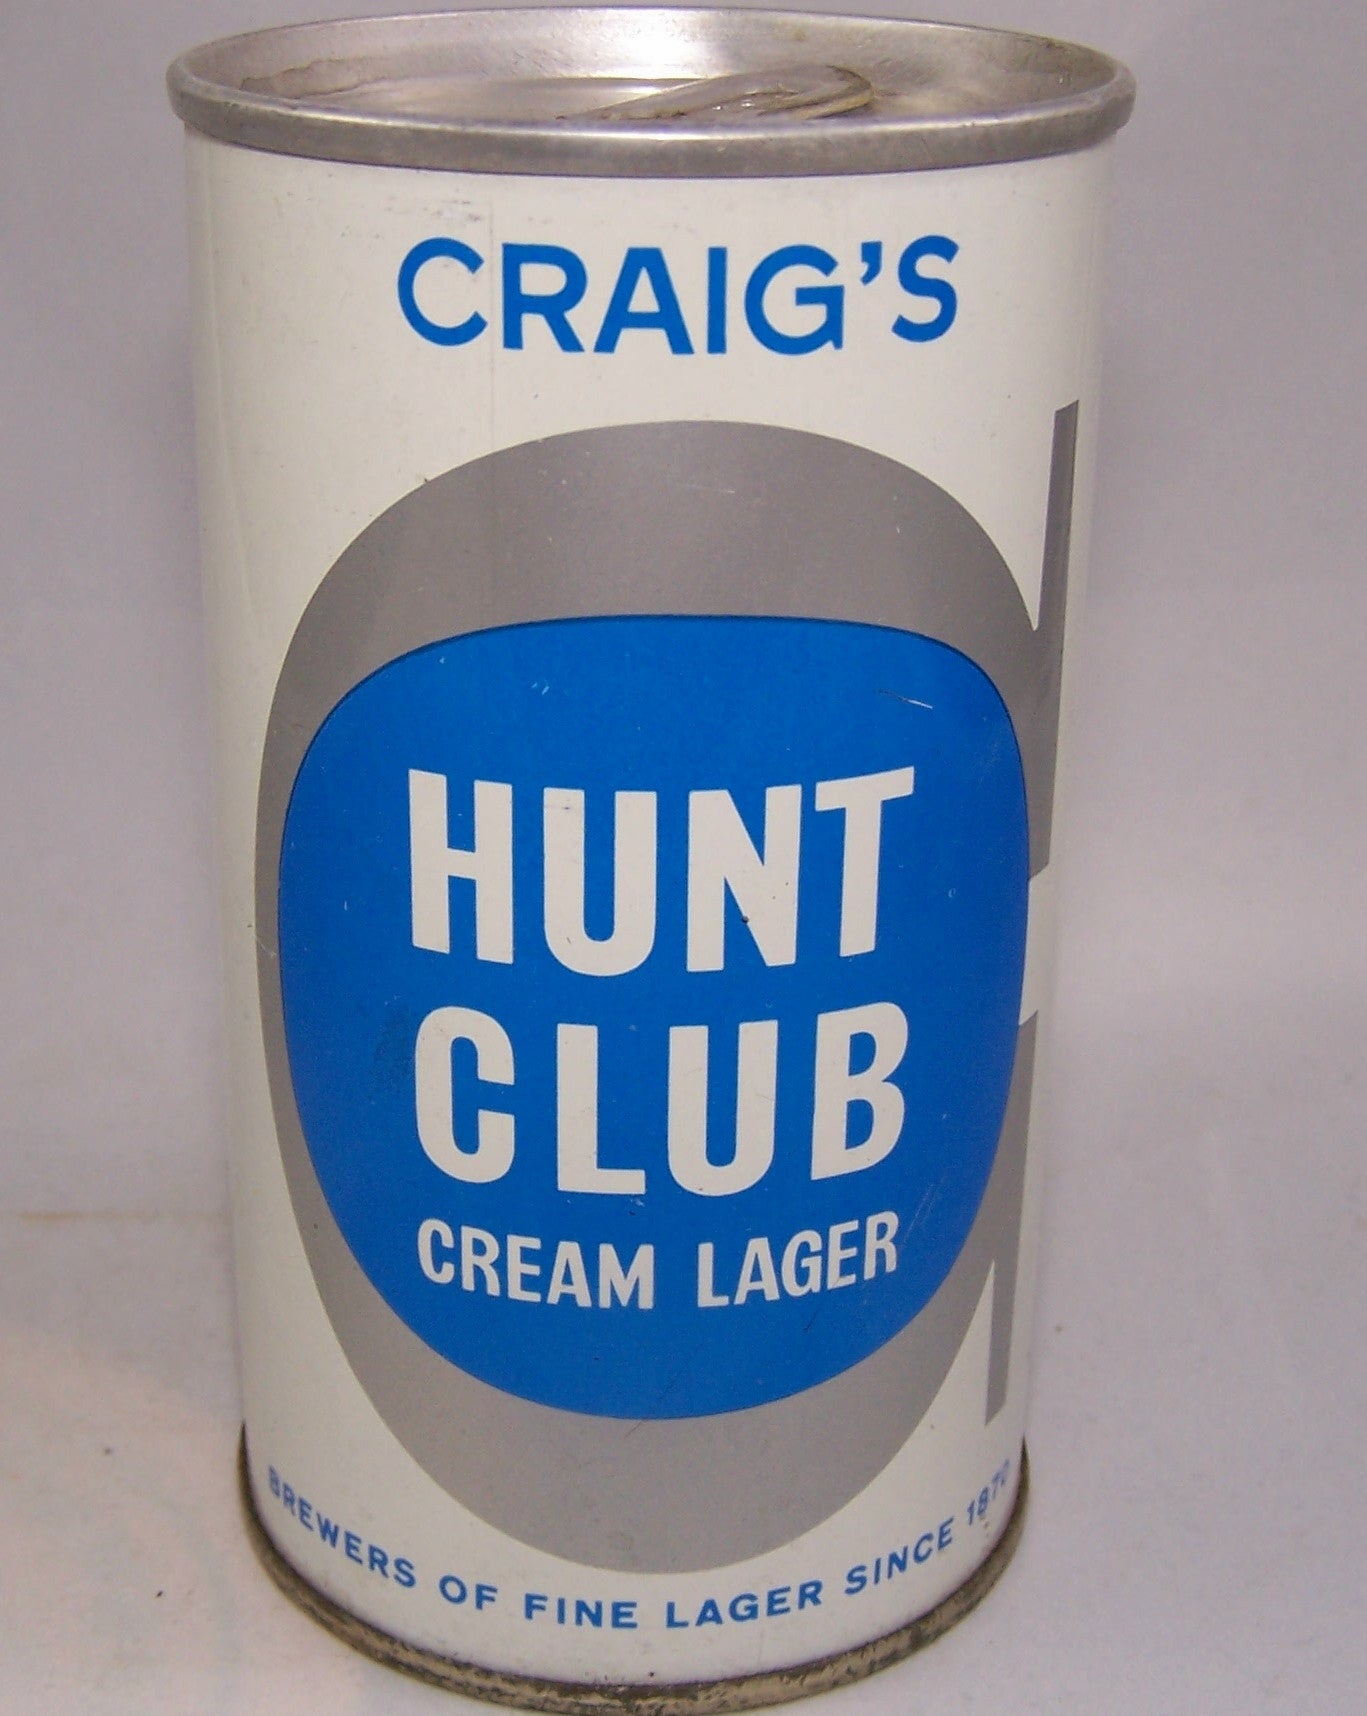 Craig's Hunt Club Cream Lager, Canadian Ziptop, Grade A1+Sold on 10/14/15